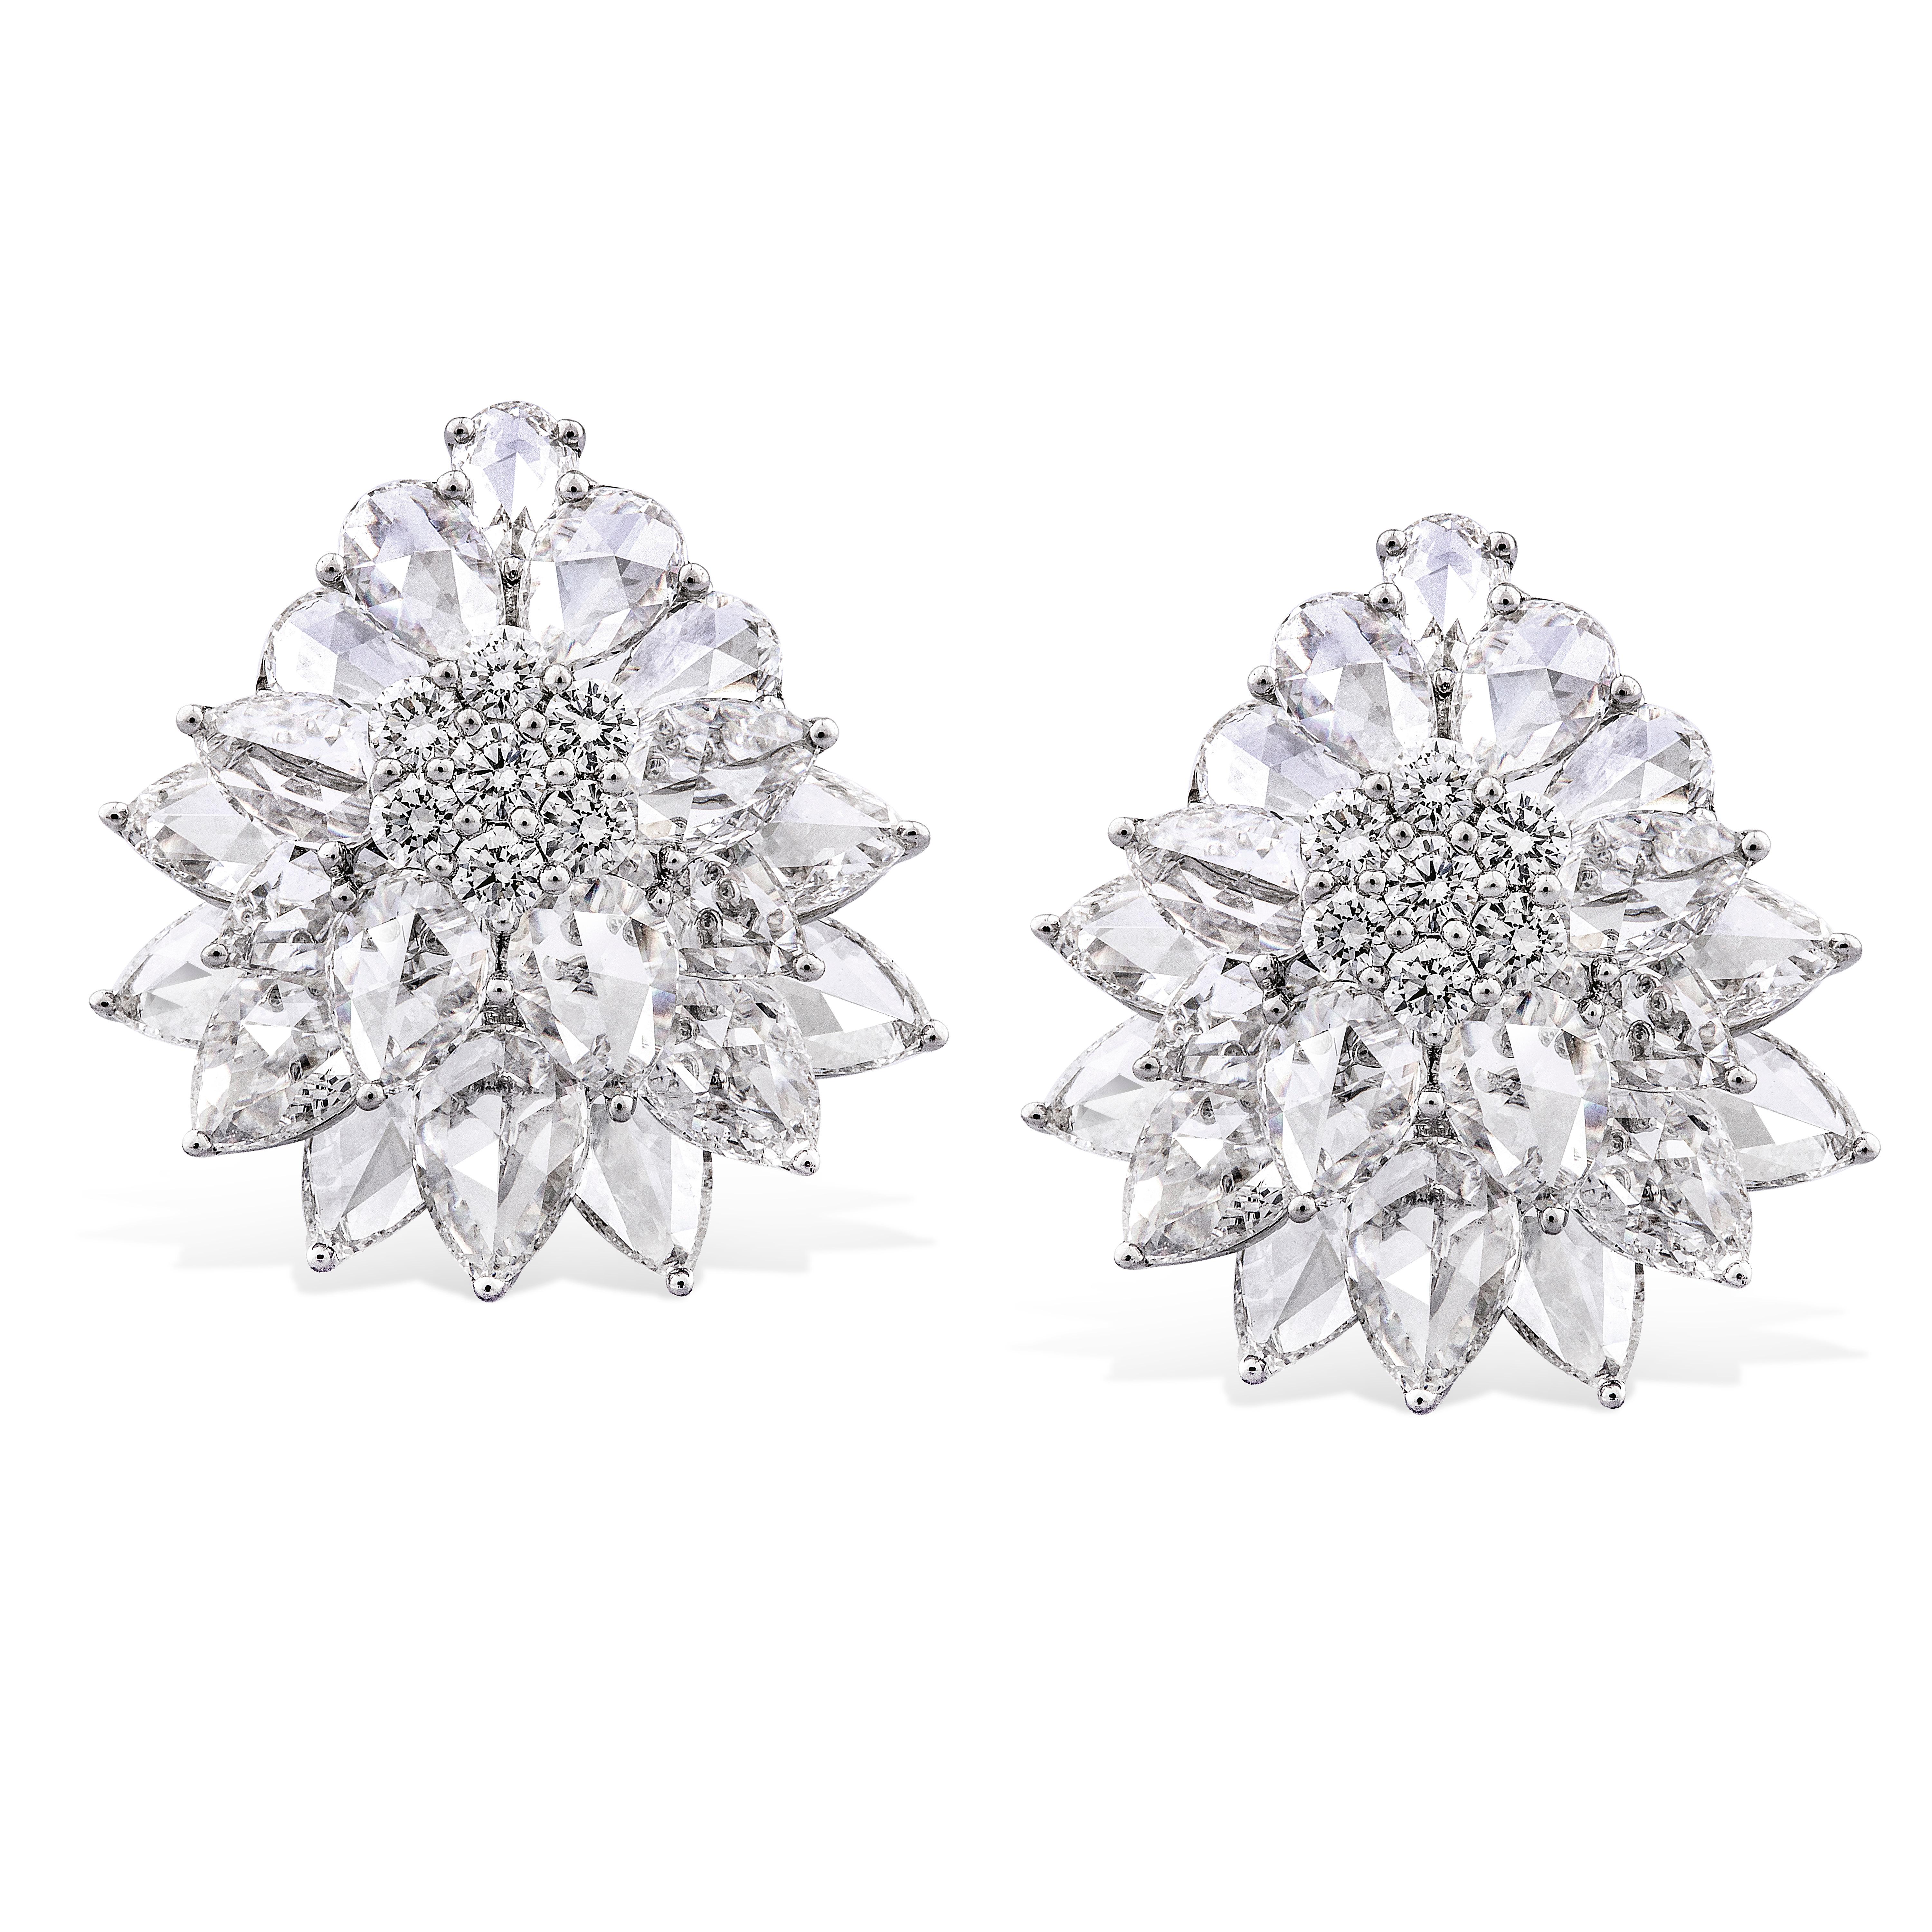 Inspired by the blooms of nature, these floral ear studs are crafted using 40 pear shape rose-cut diamonds to recreate their delicate petals. The centres of the flowers are formed of 14 round brilliant cut diamonds to ensure maximum sparkle. 

Total